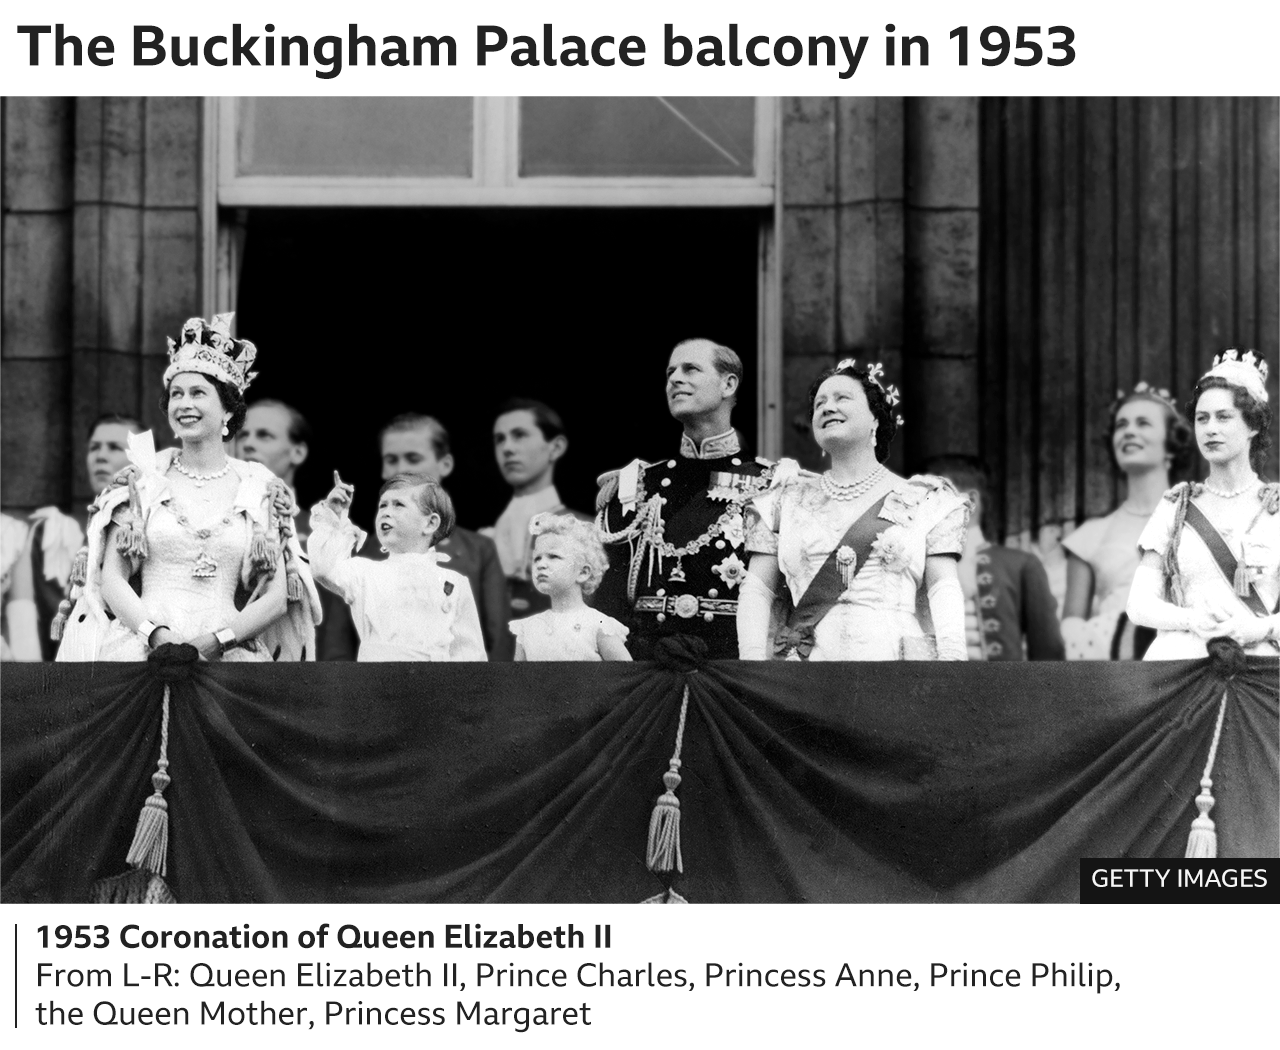 Annotated images showing the Buckingham Palace balcony during Queen Elizabeth II's coronation - with Prince Charles, Princess Anne, Prince Philip, the Queen Mother and Princess Margaret among those present